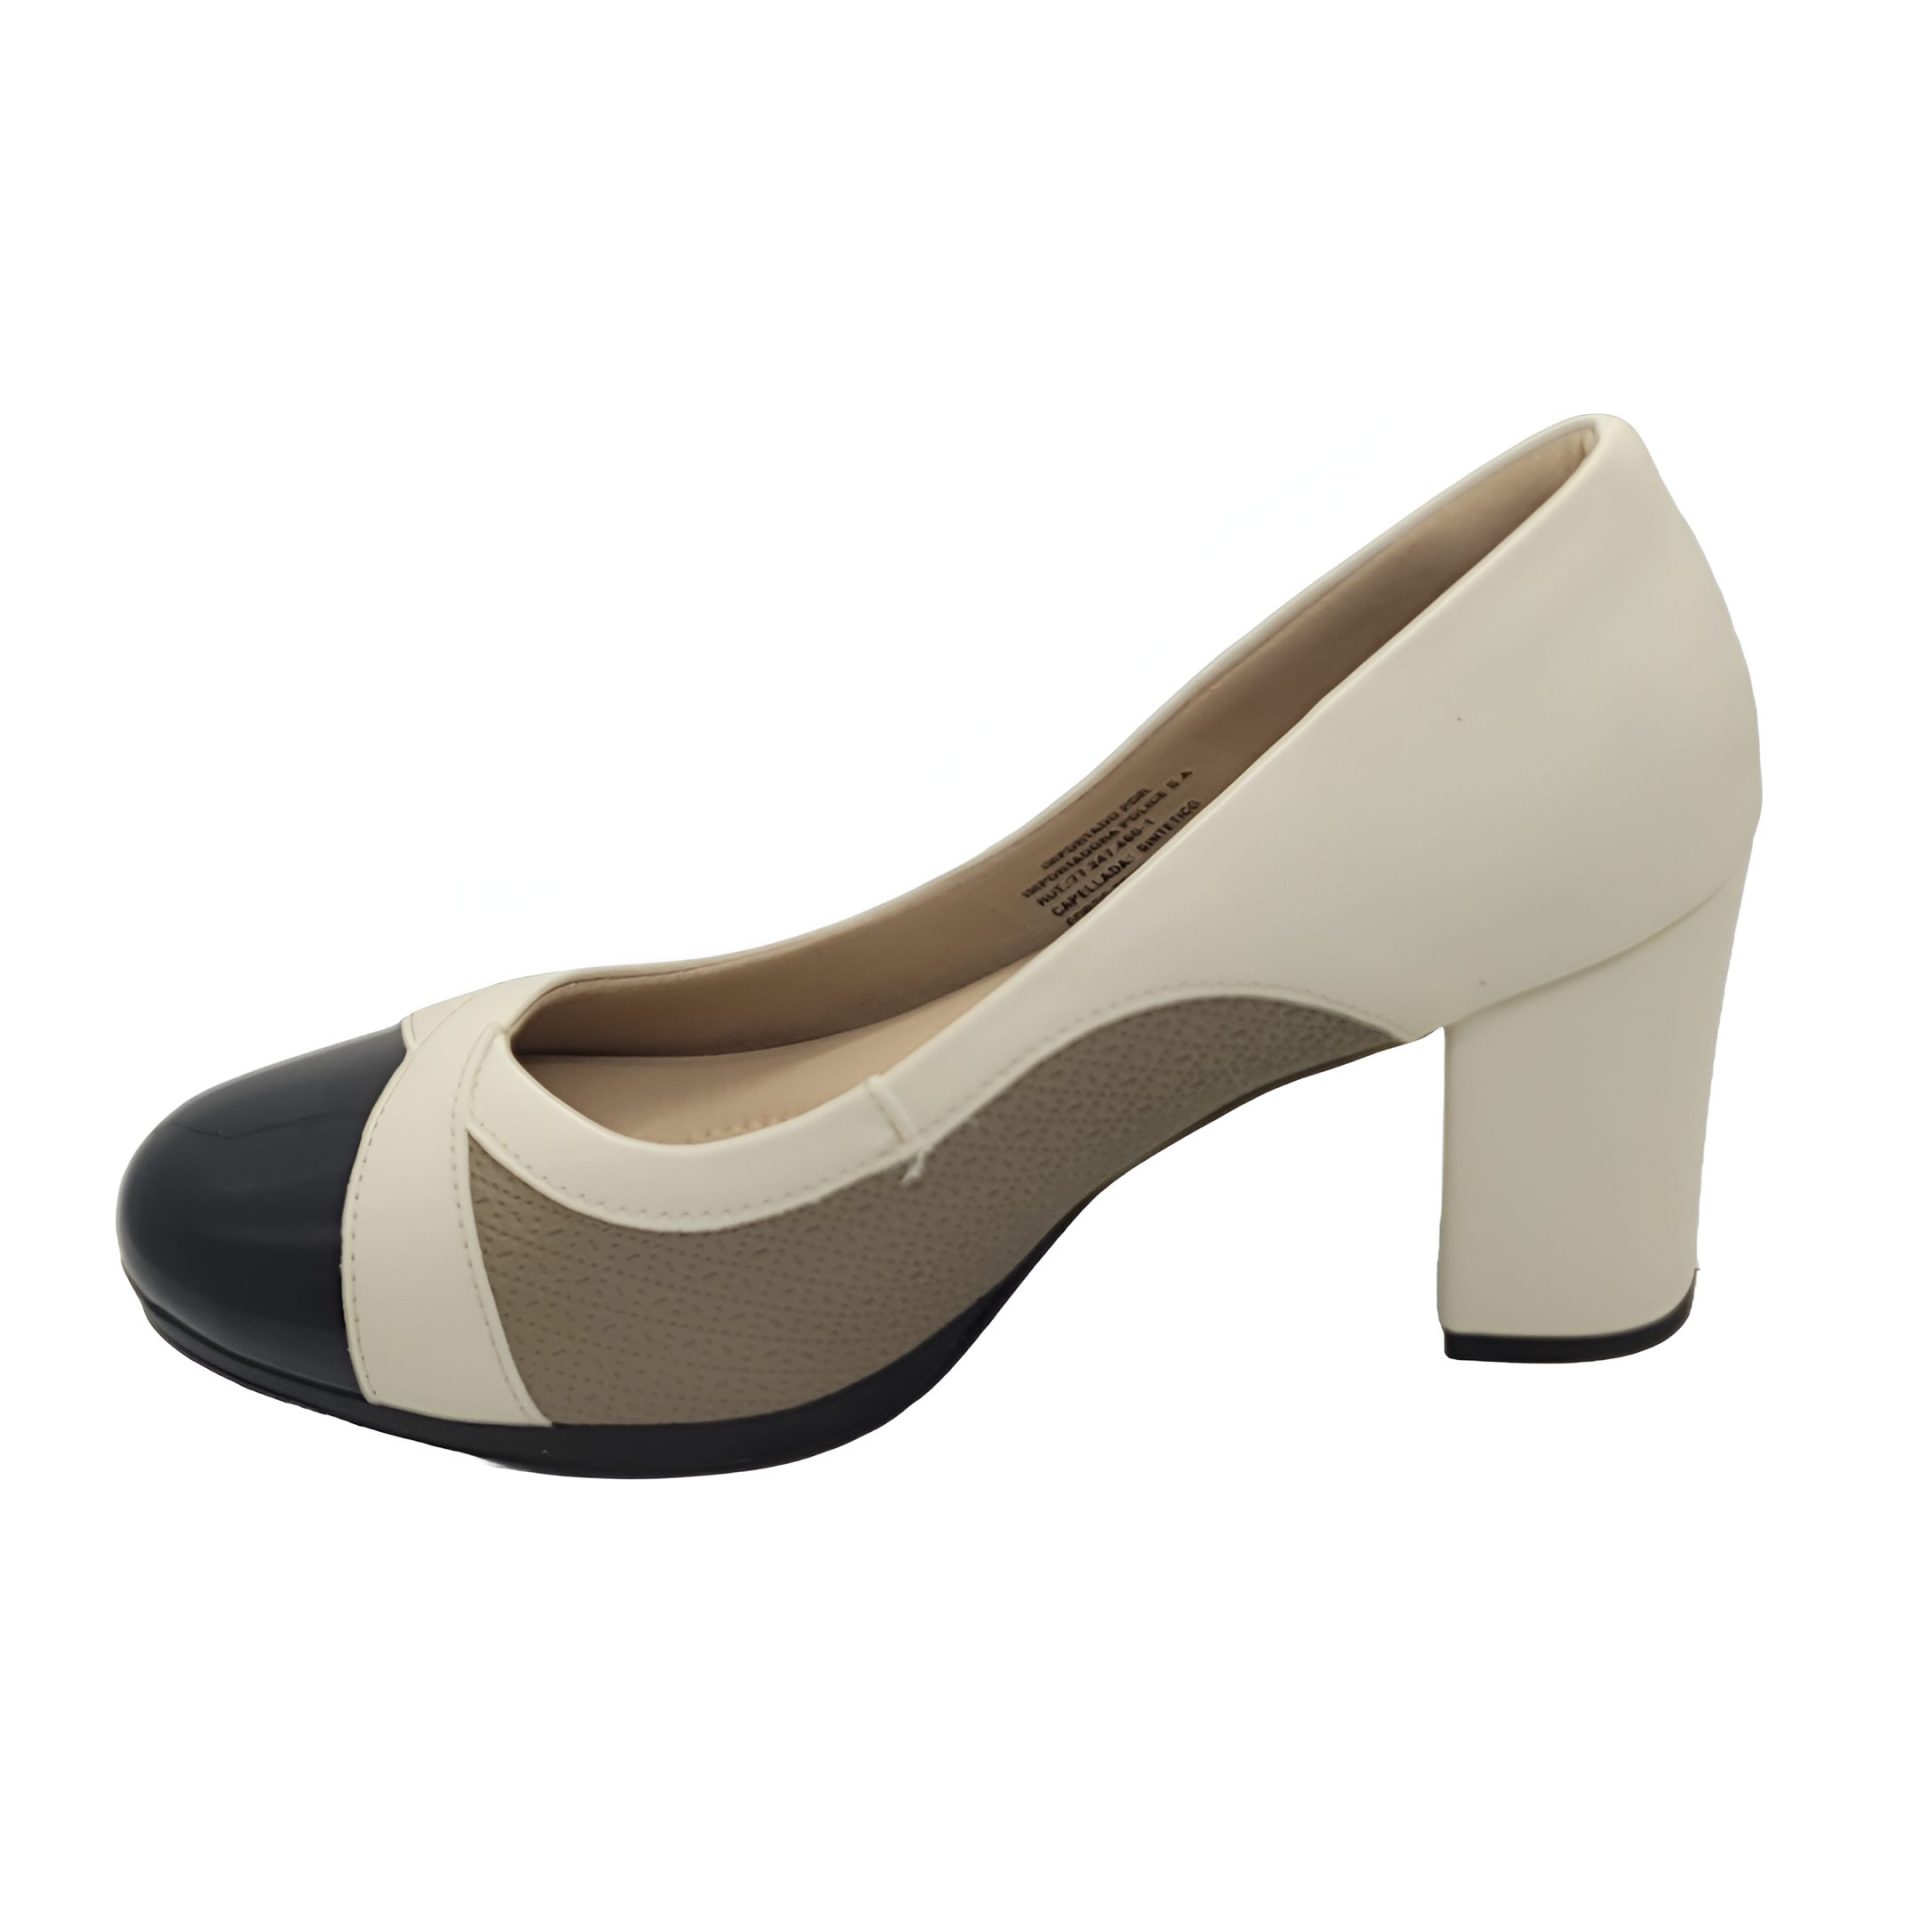 ZAPATOS PICCADILLY BEIGE PI-13023200000001